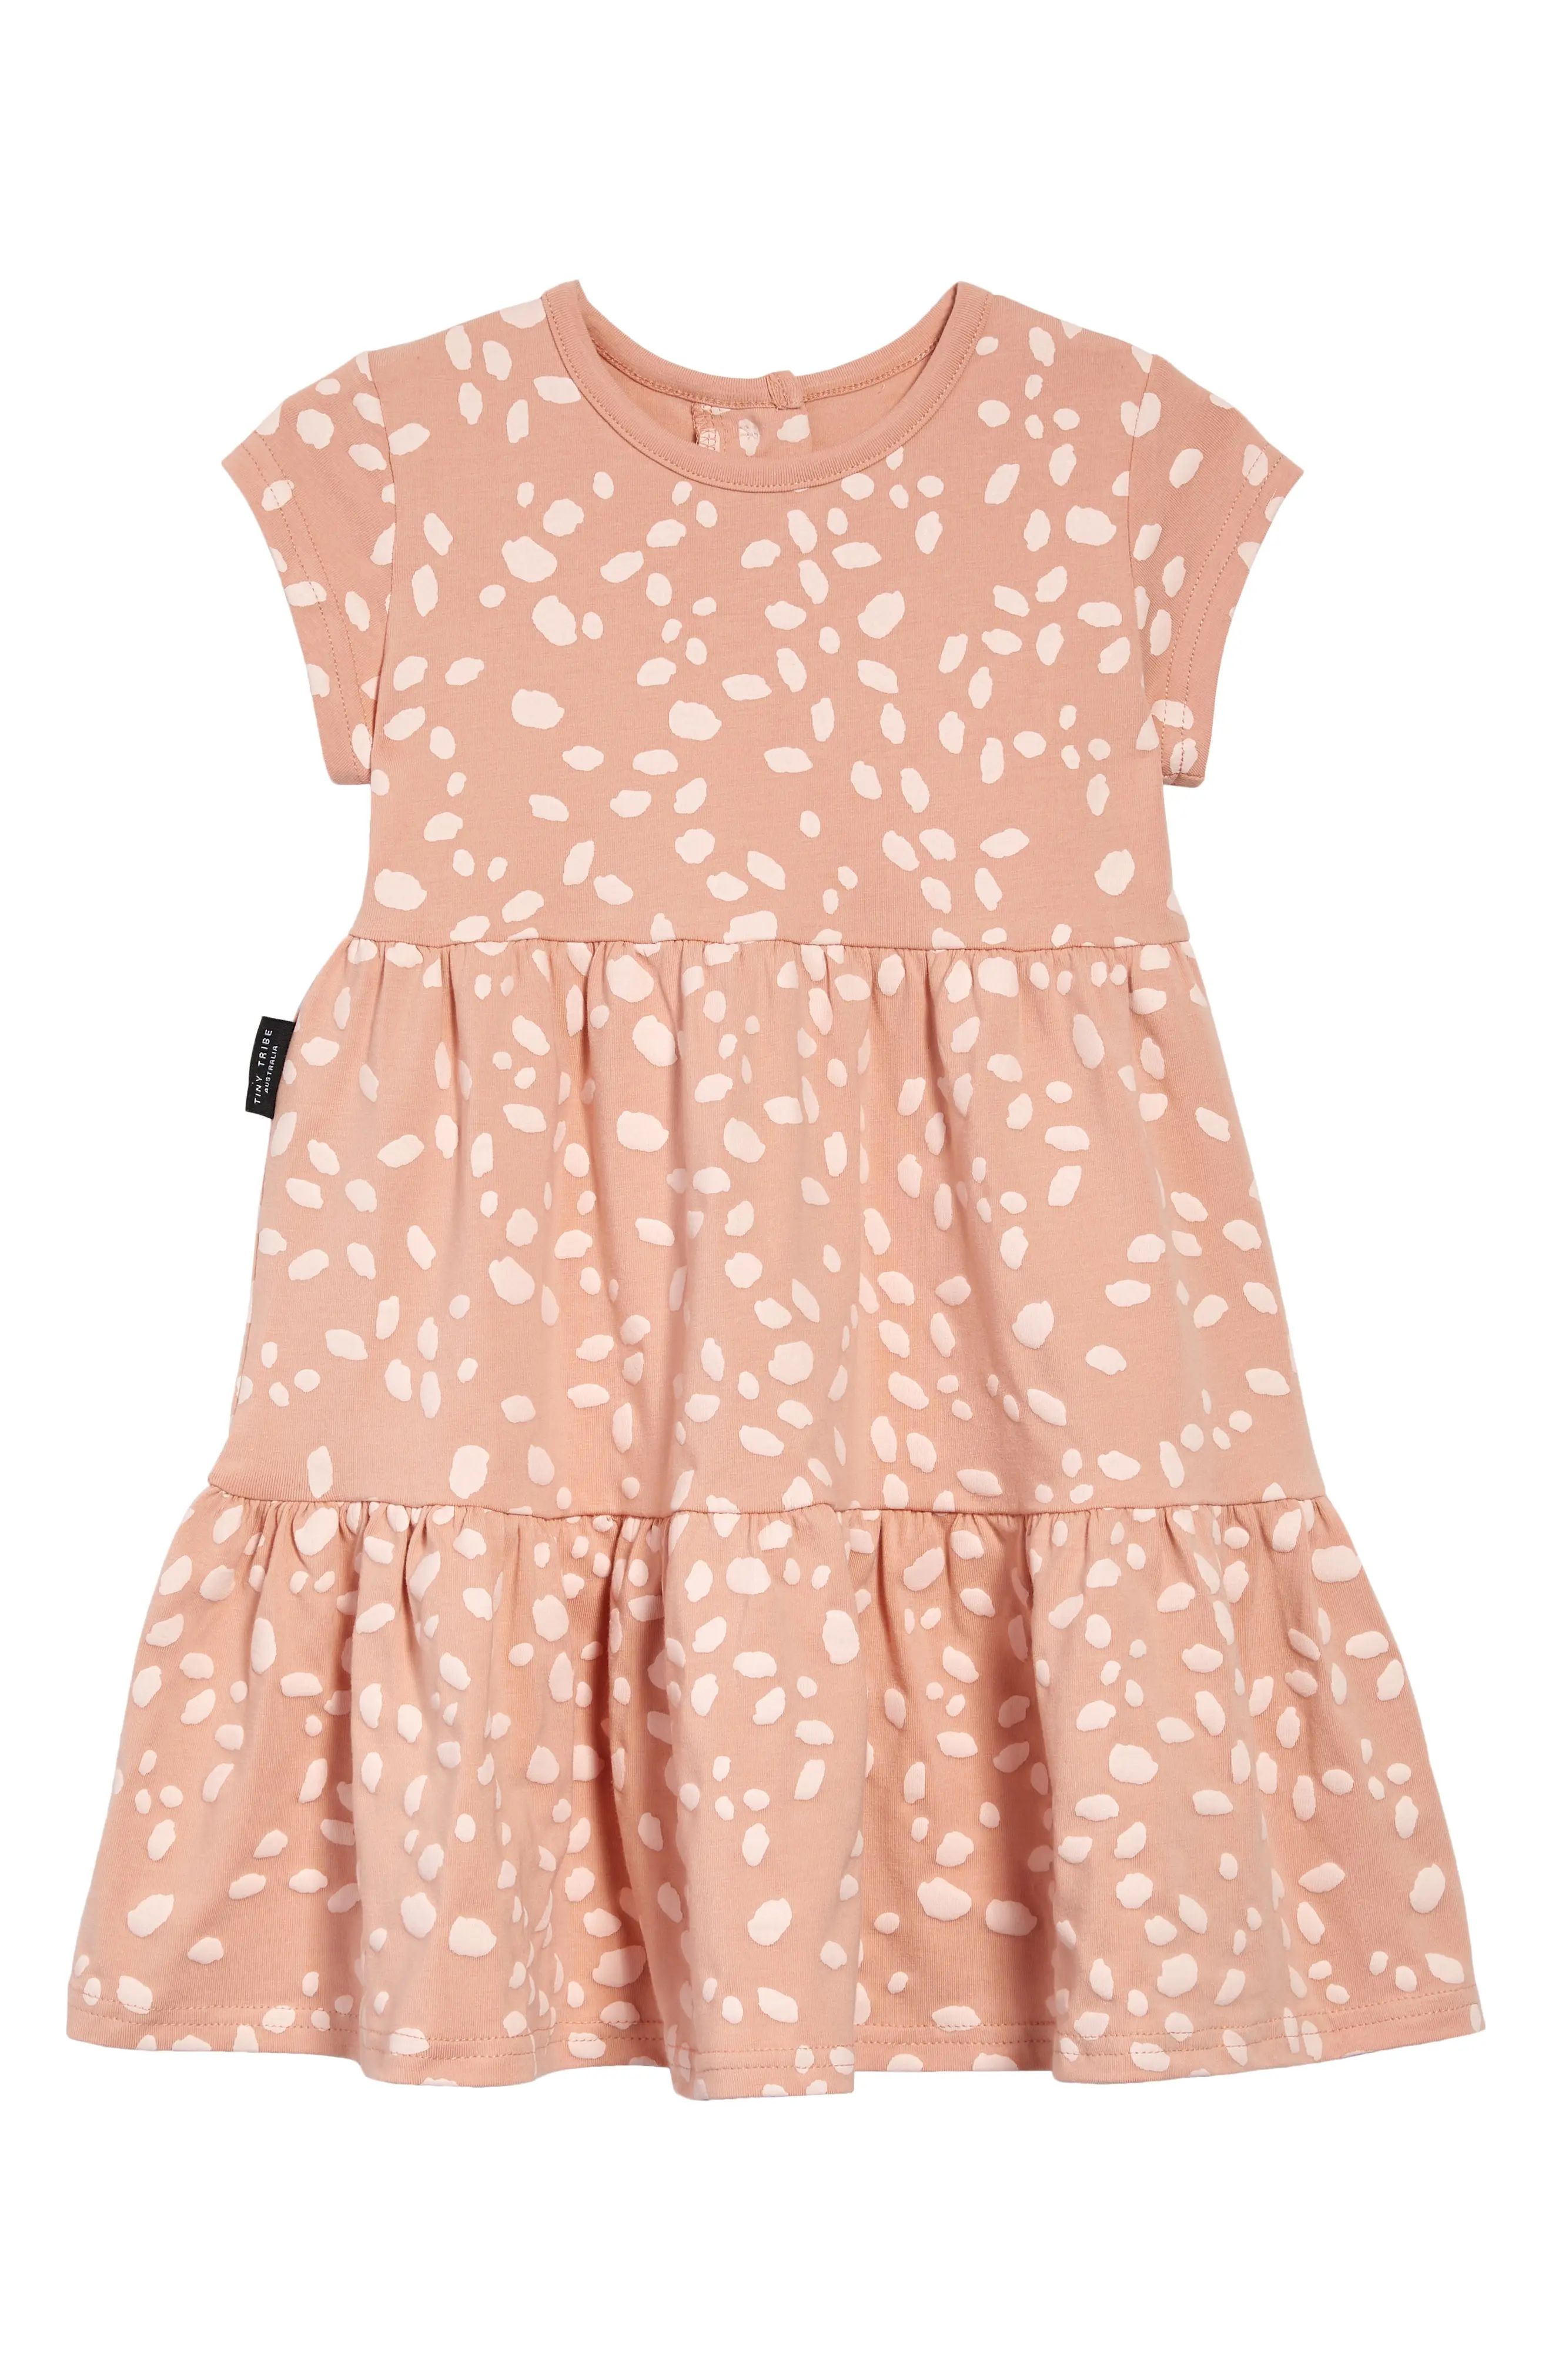 TINY TRIBE Kids' Speckle Dress in Dusty Rose at Nordstrom, Size 2T Us | Nordstrom